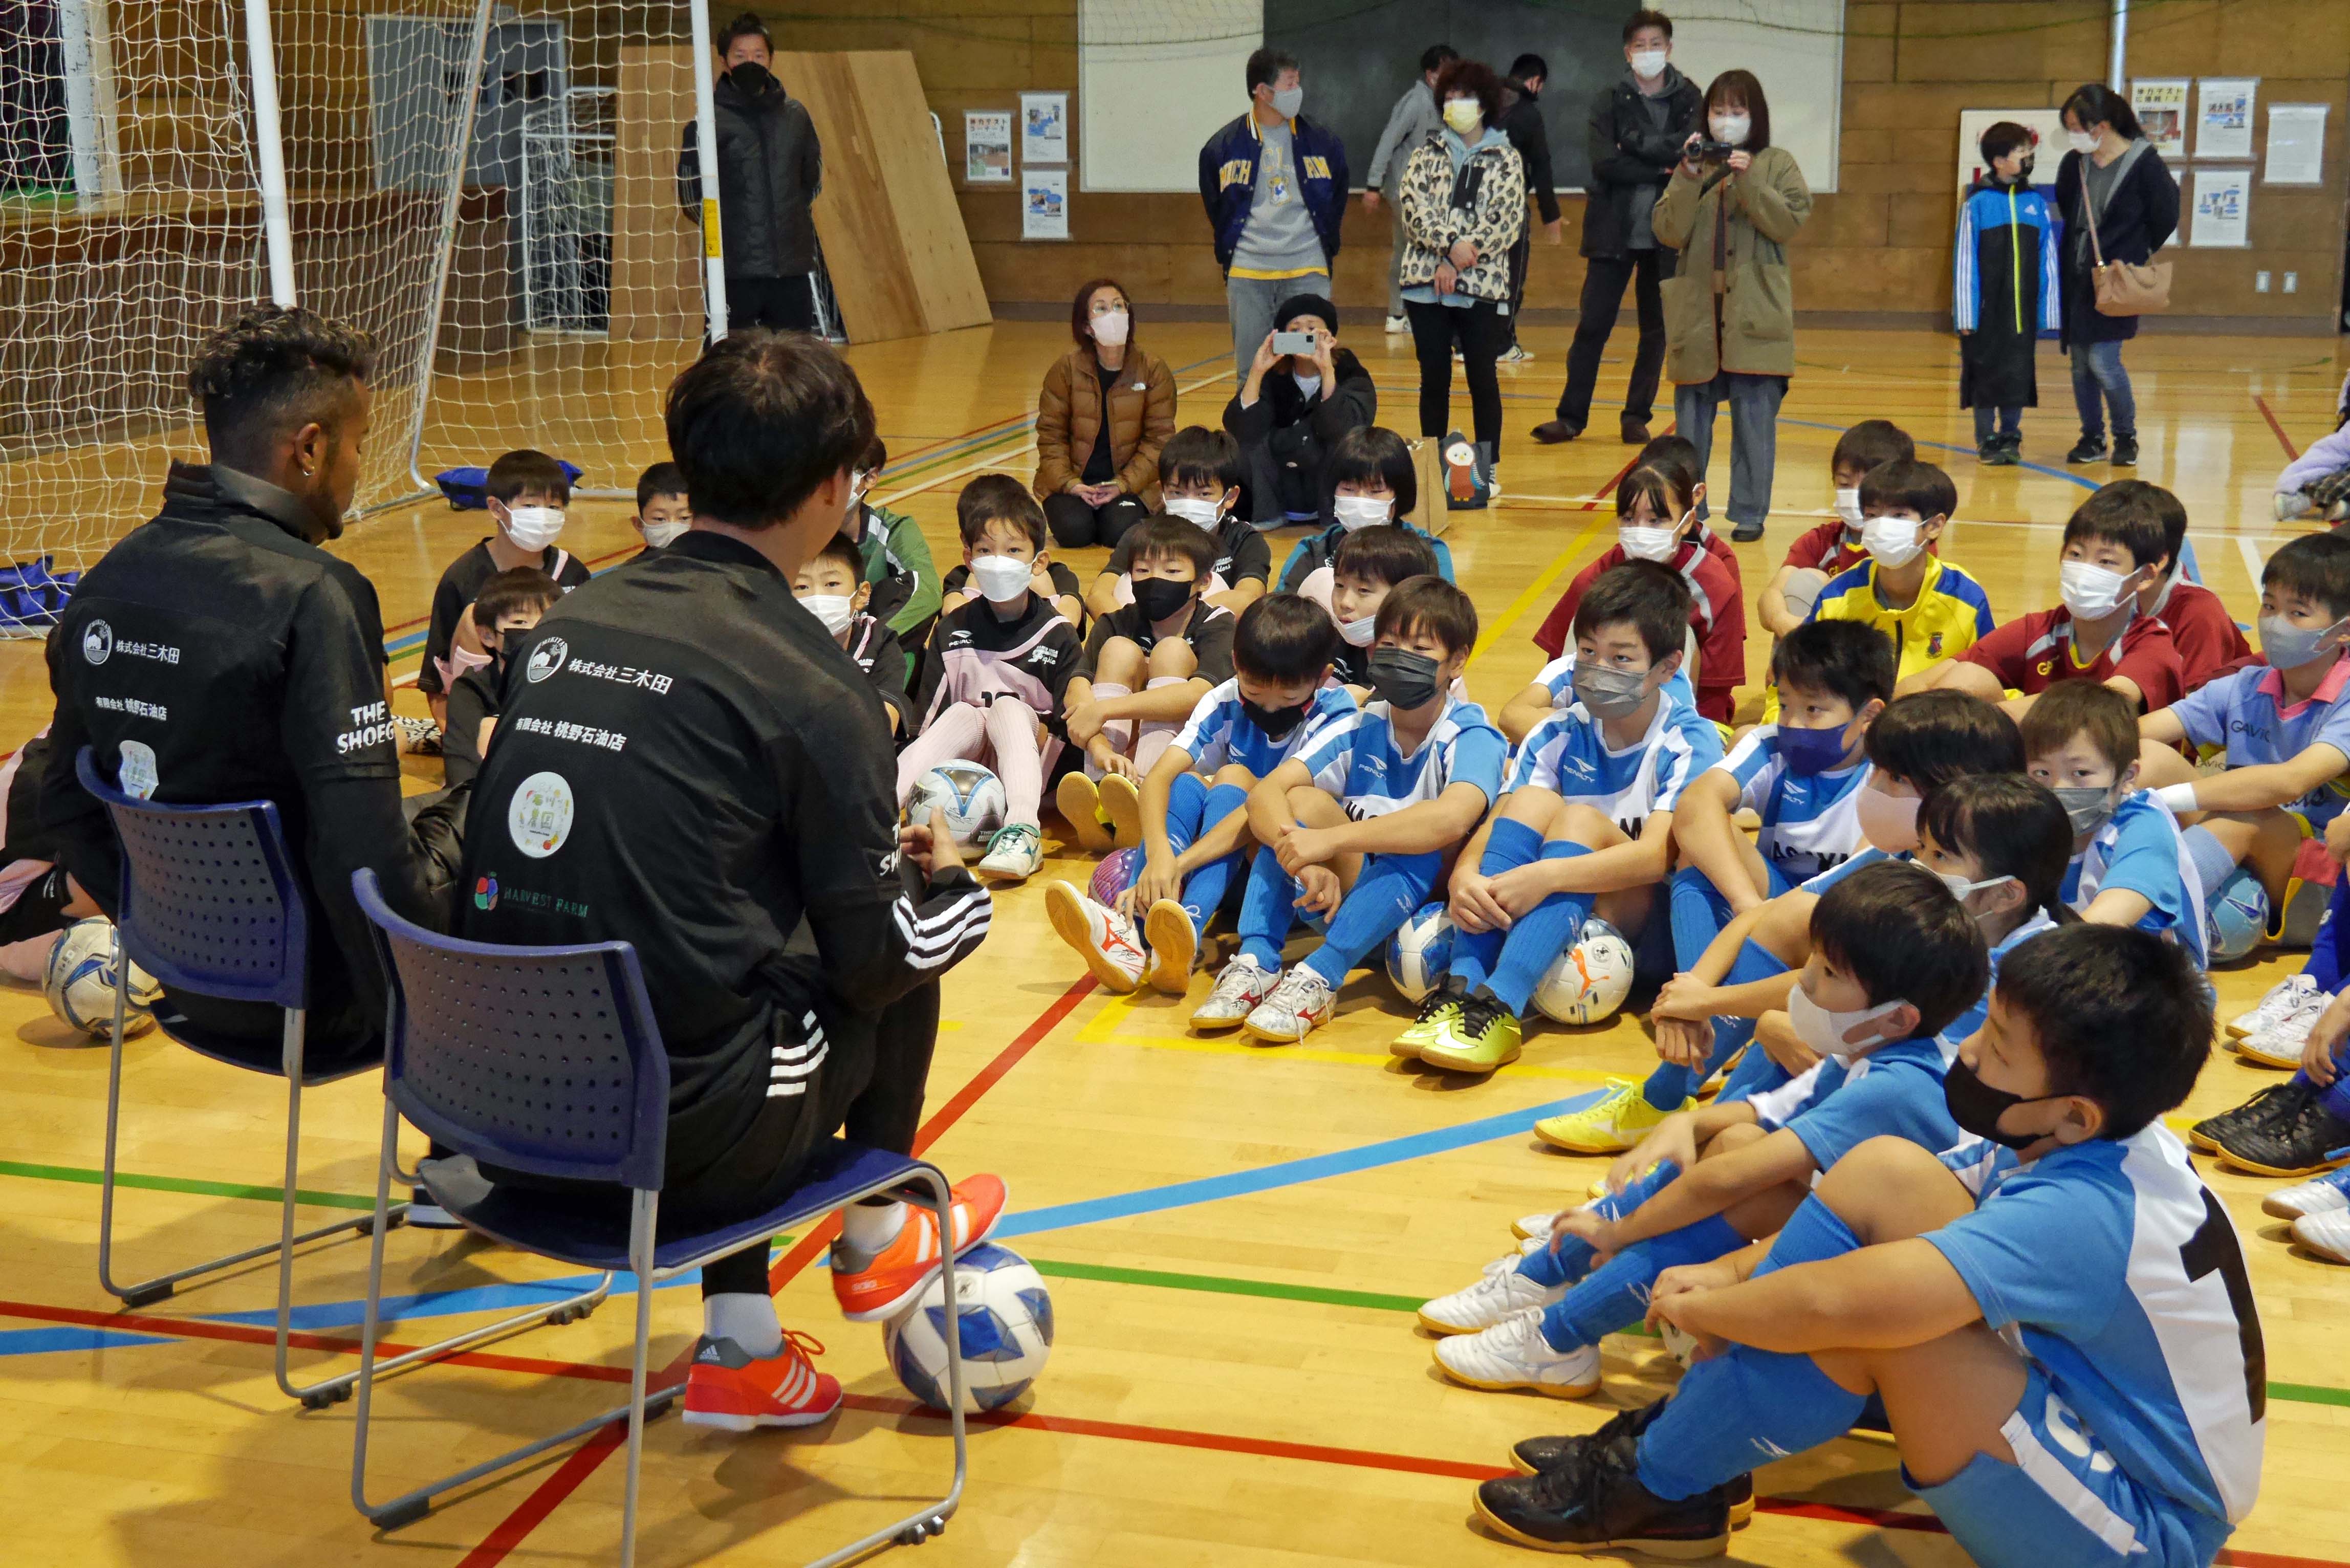 20221126_MUSASHICUP17-01